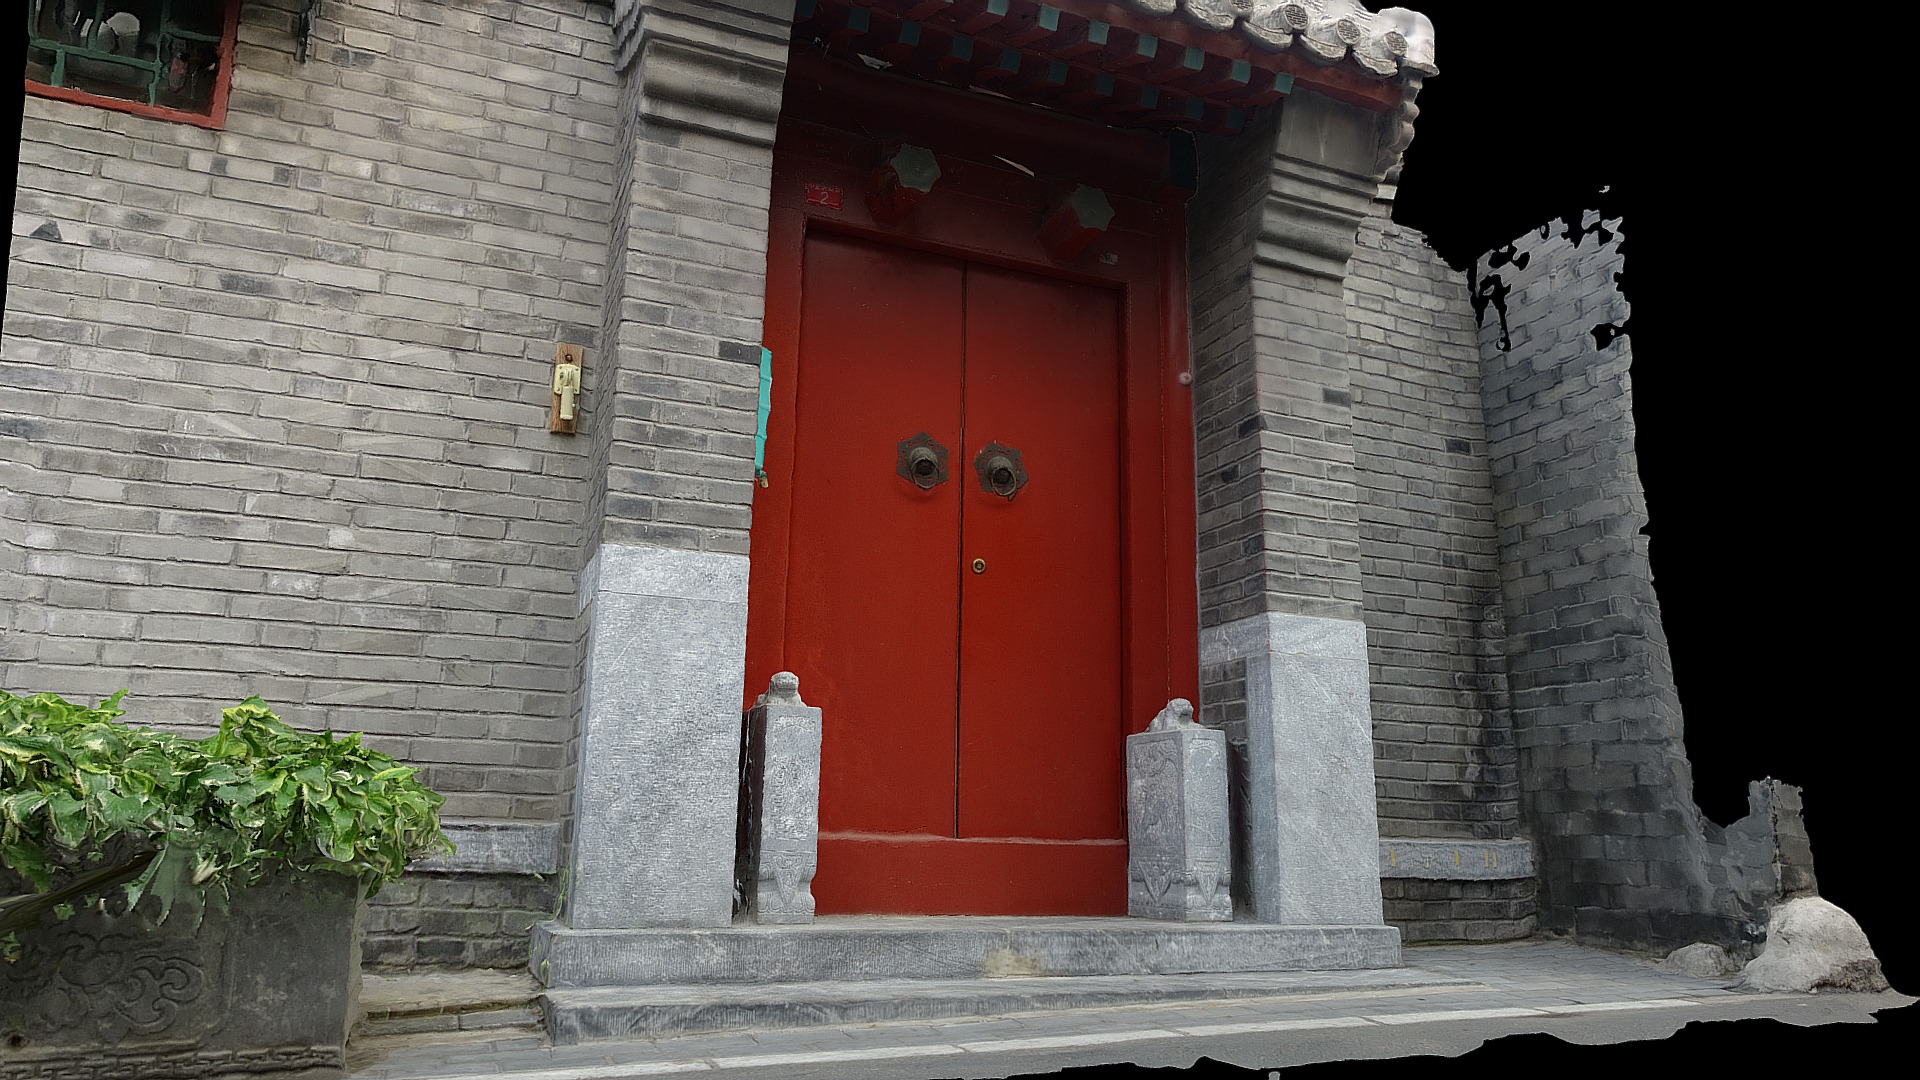 3D model 2016-10 – Beijing 23 - This is a 3D model of the 2016-10 - Beijing 23. The 3D model is about a red door on a stone building.